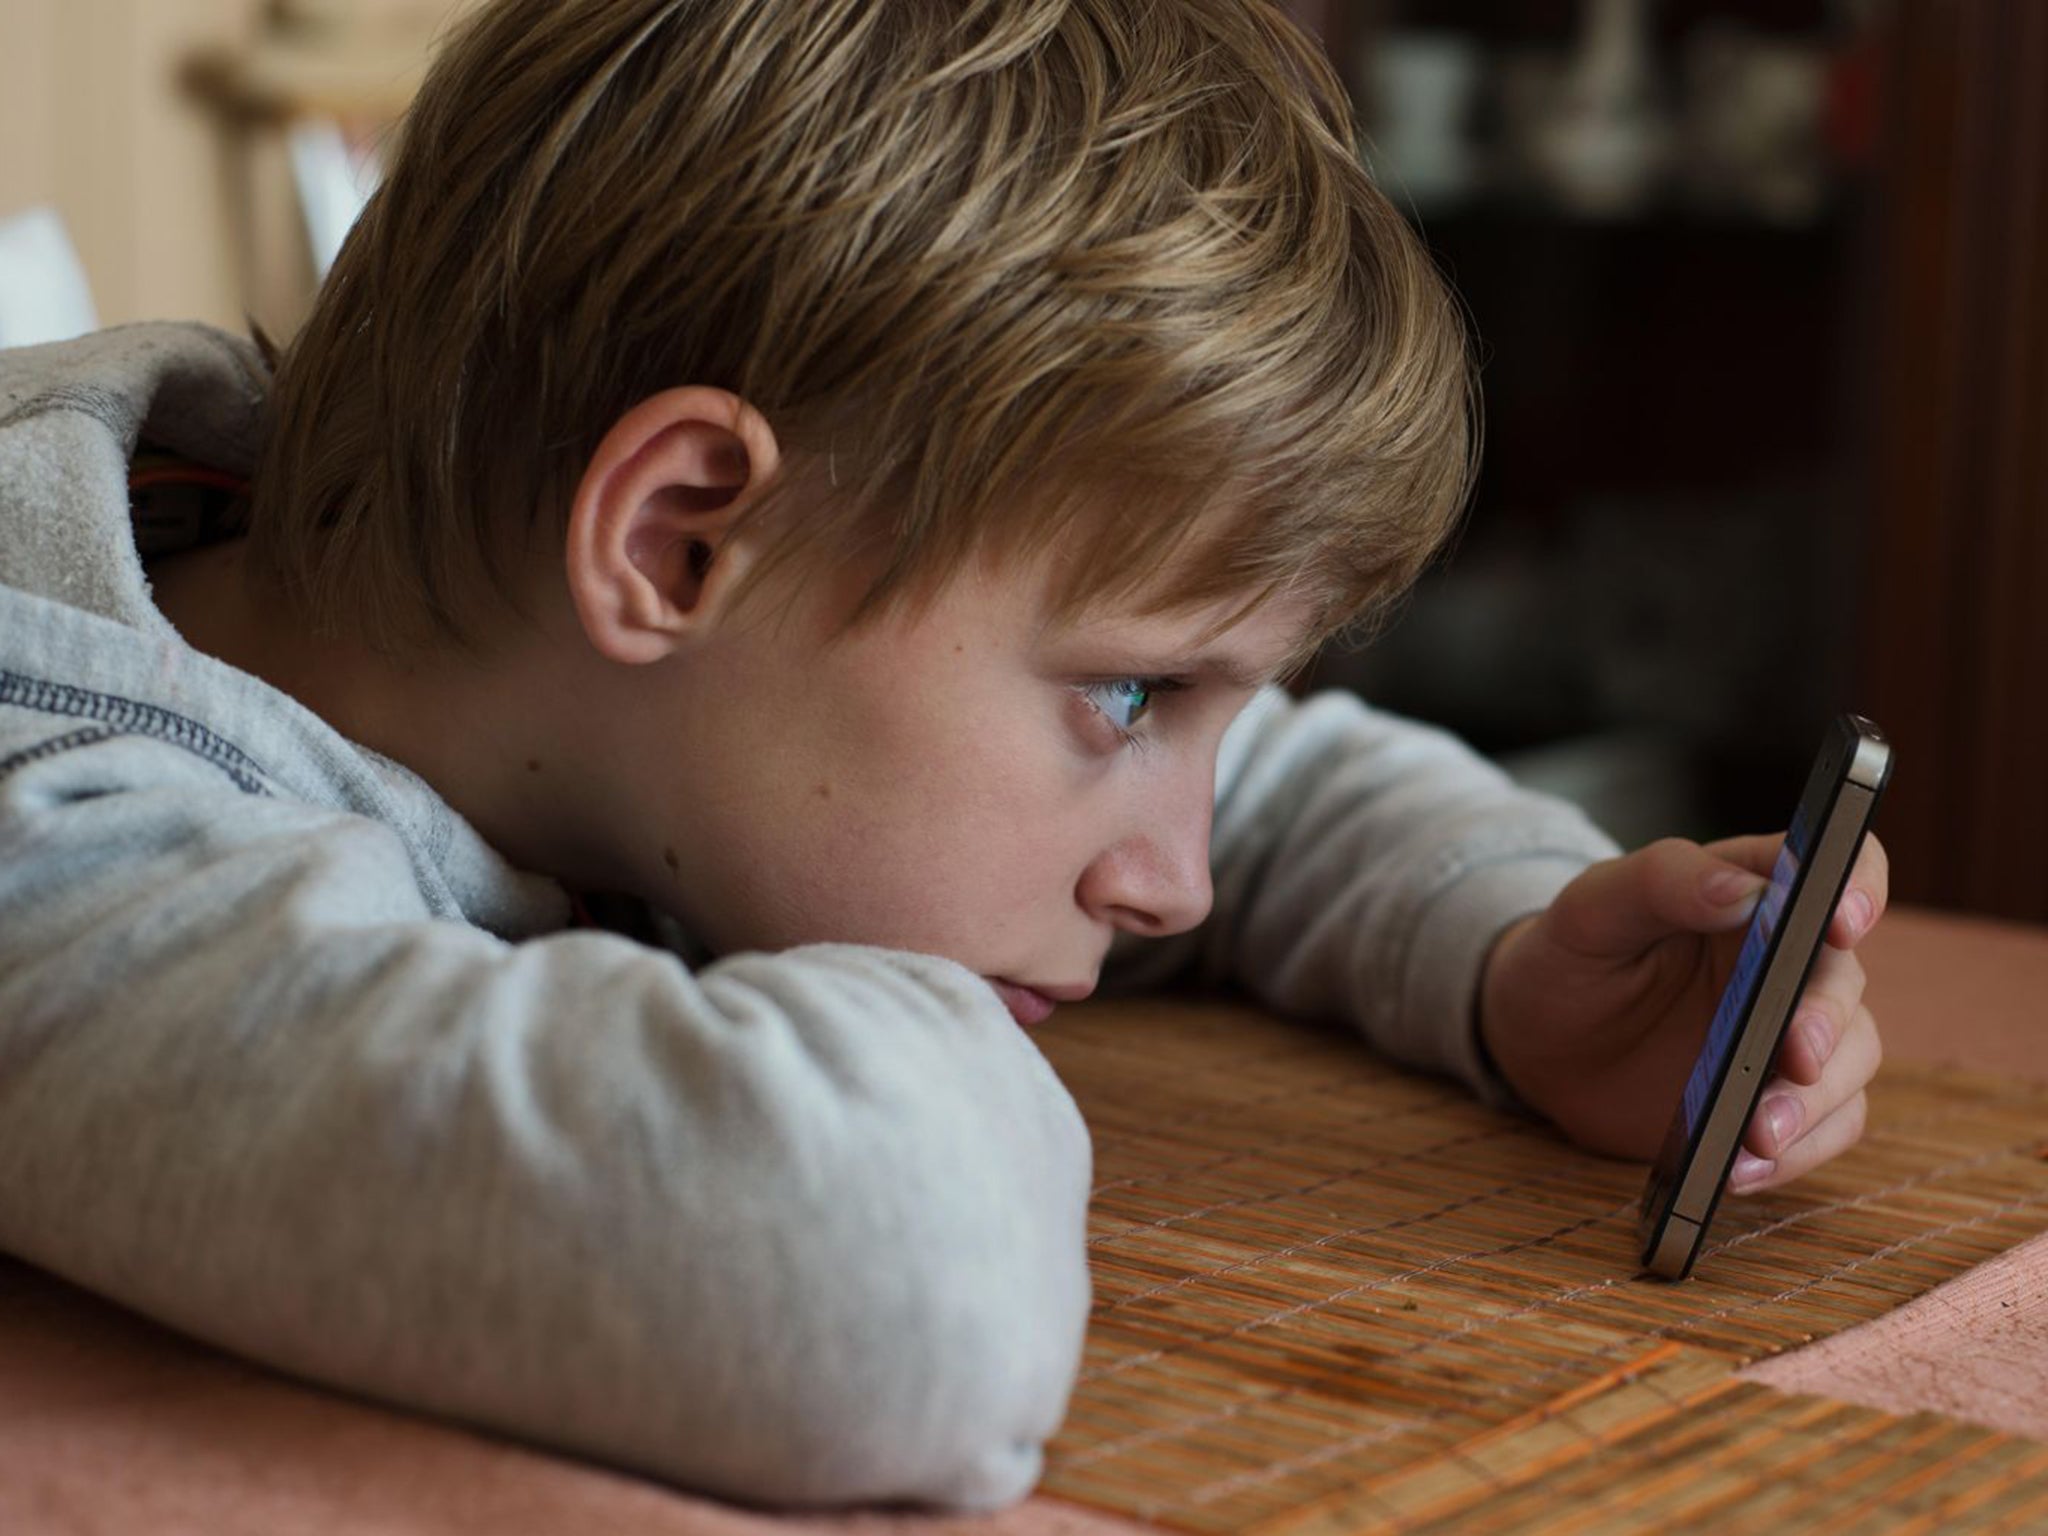 Real Toddler Watching Porn - Half of all children have watched porn online - including a ...